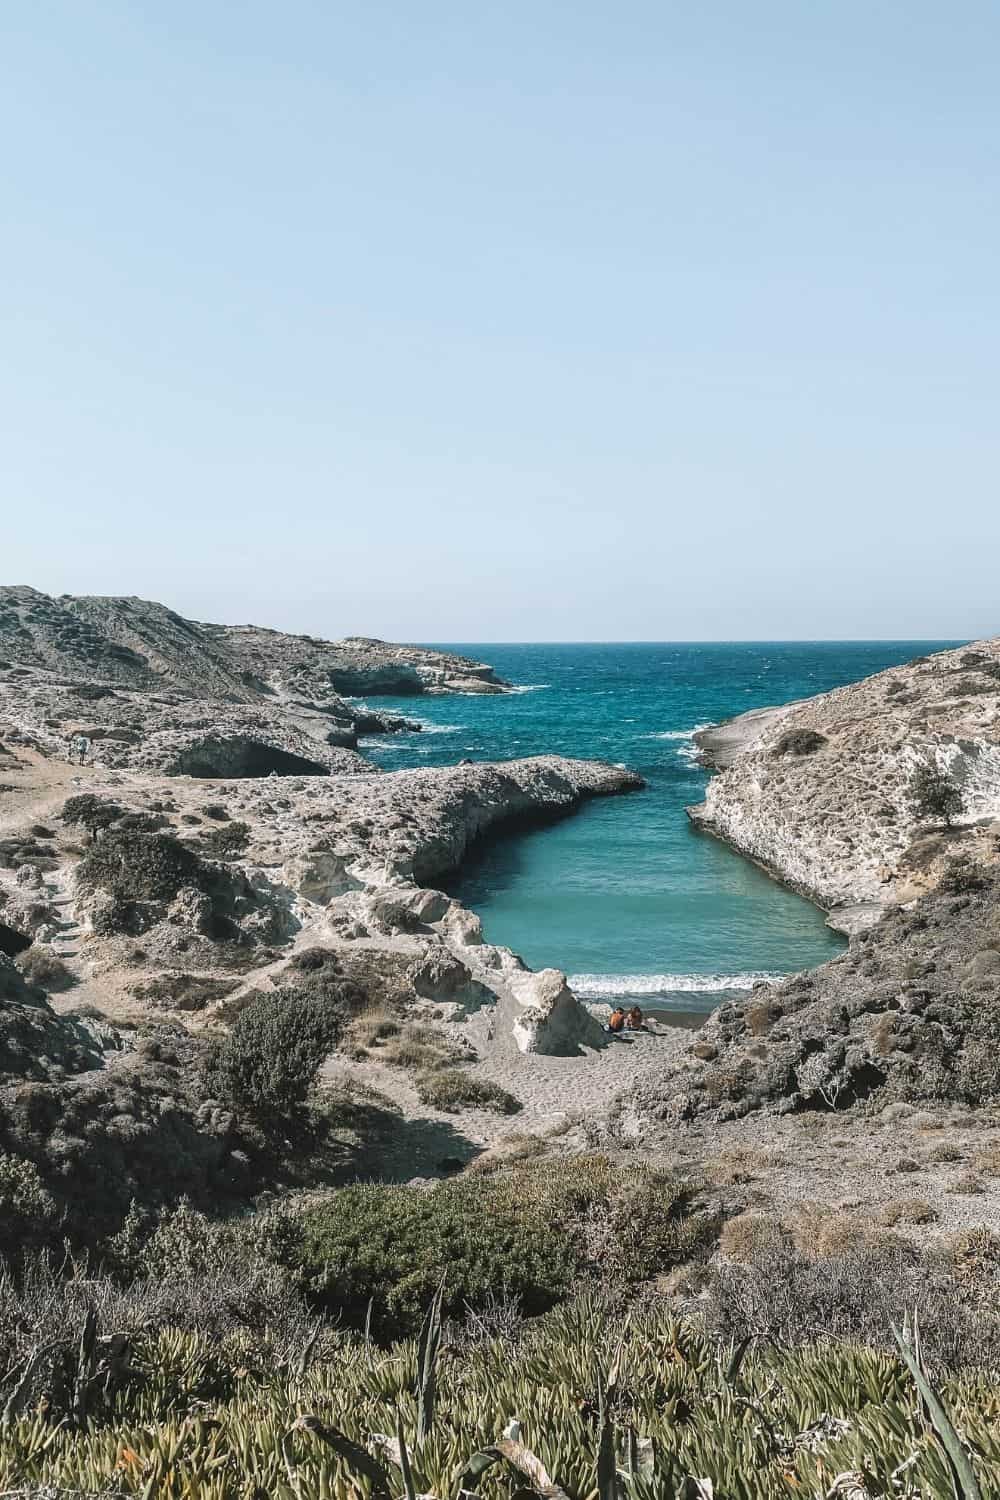 The best Milos beaches: 22 beaches in Milos for a stunning trip